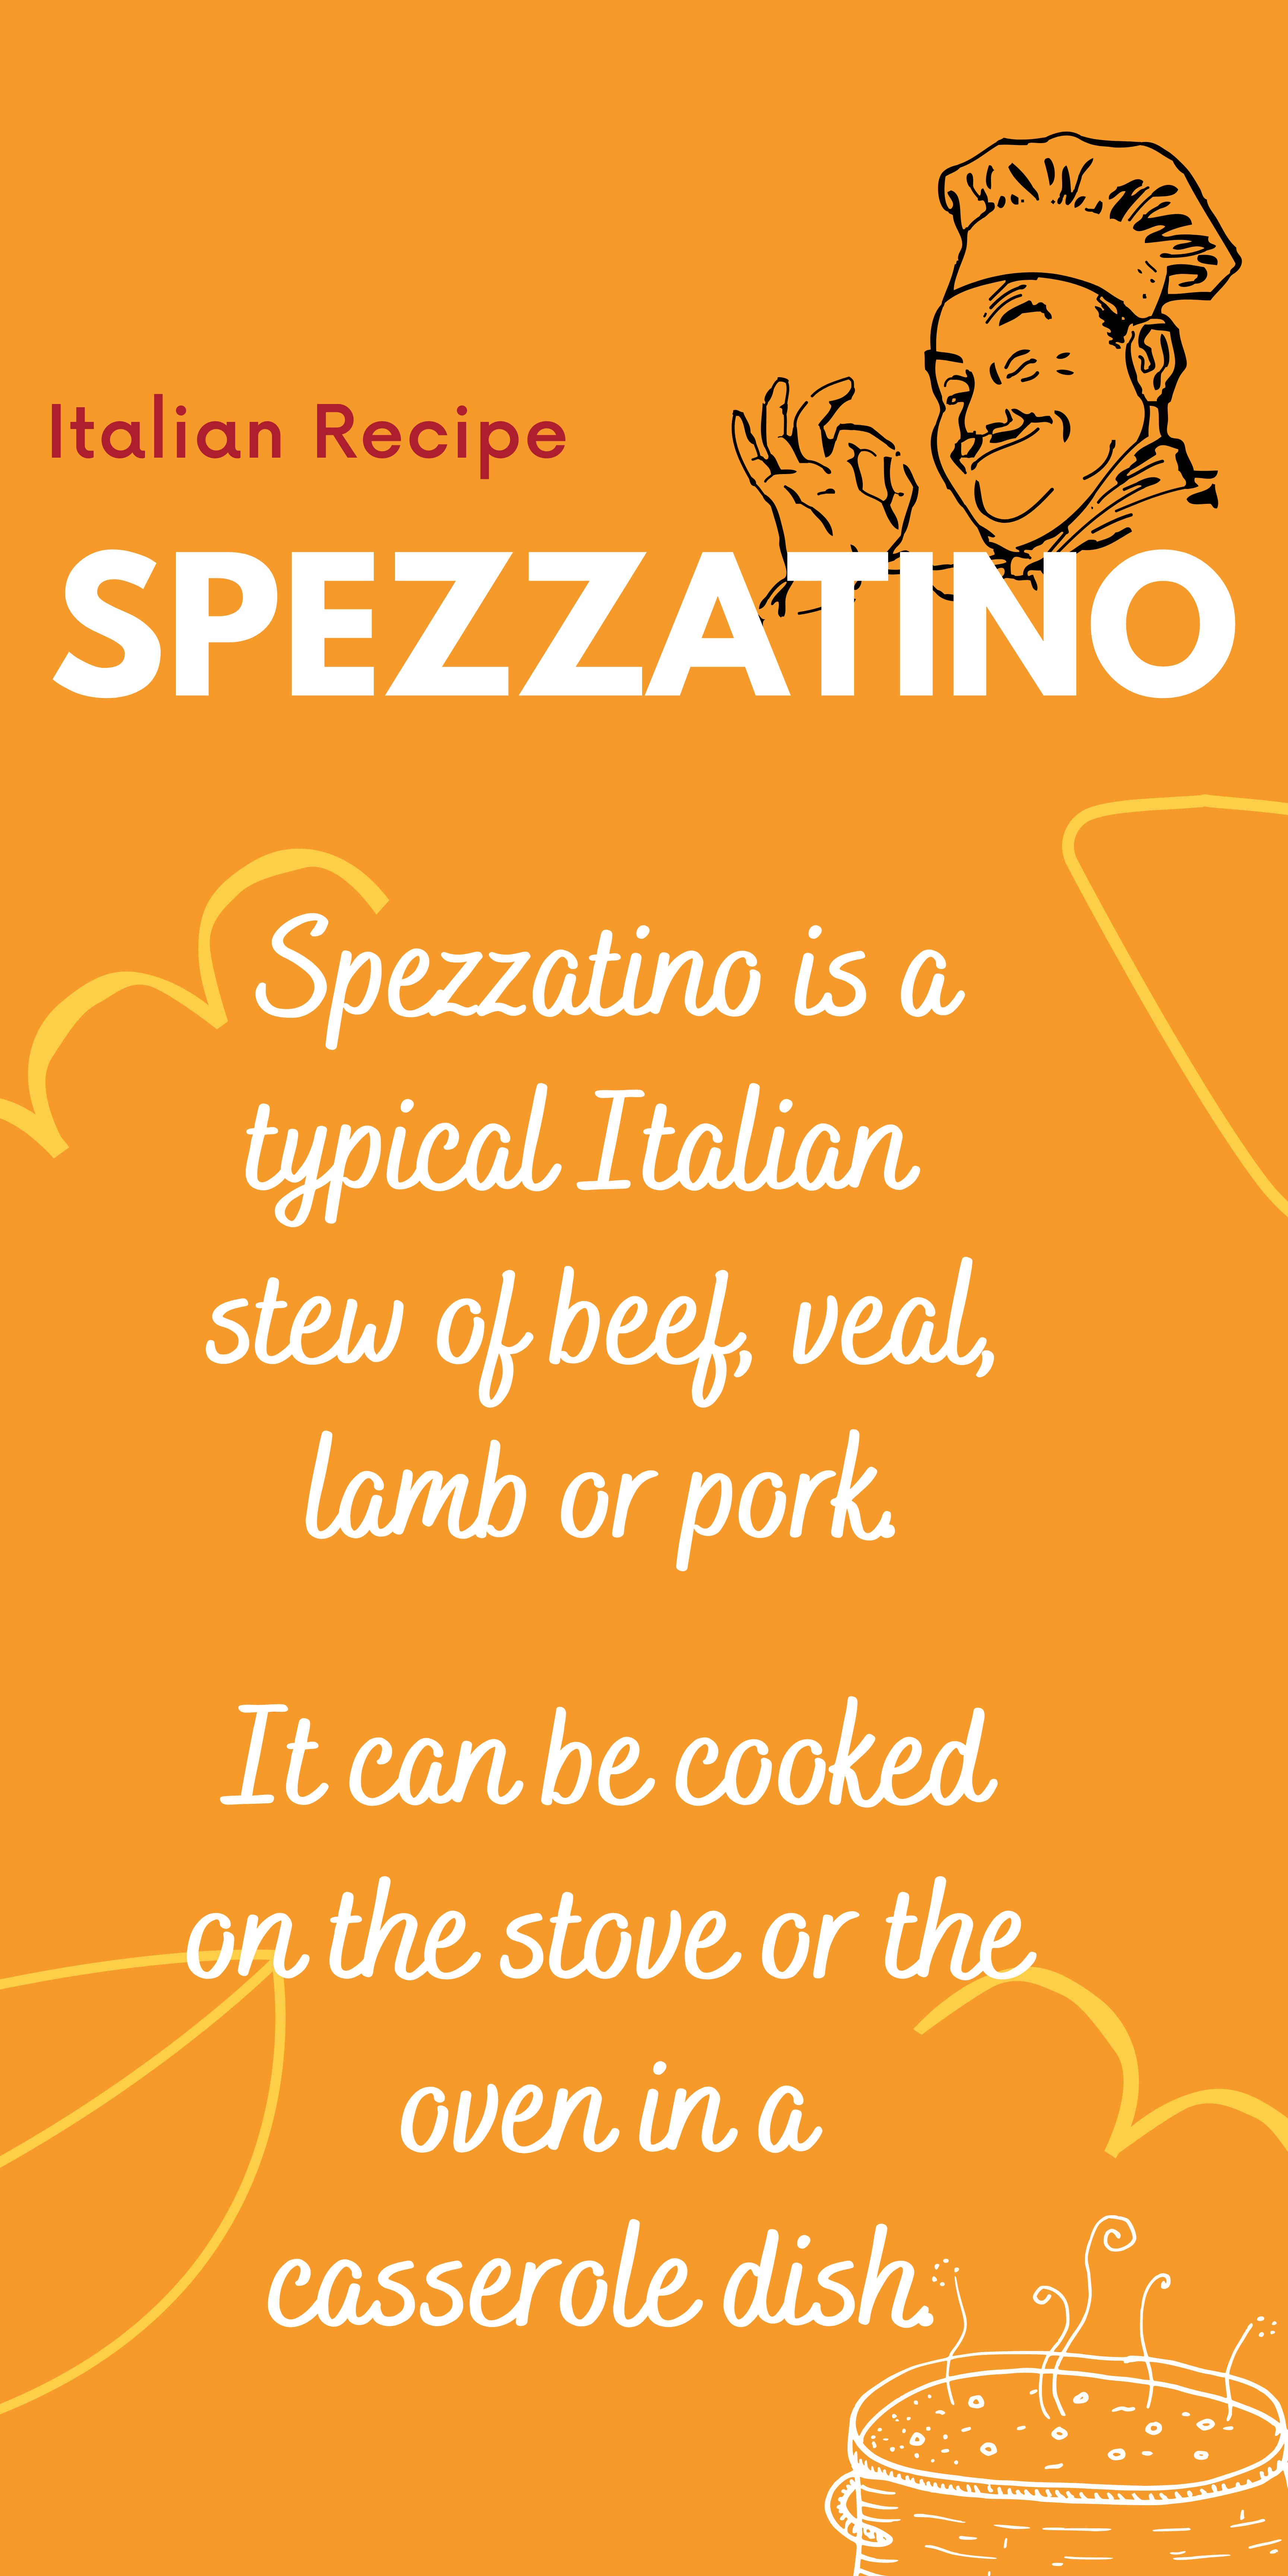 What is Spezzatino